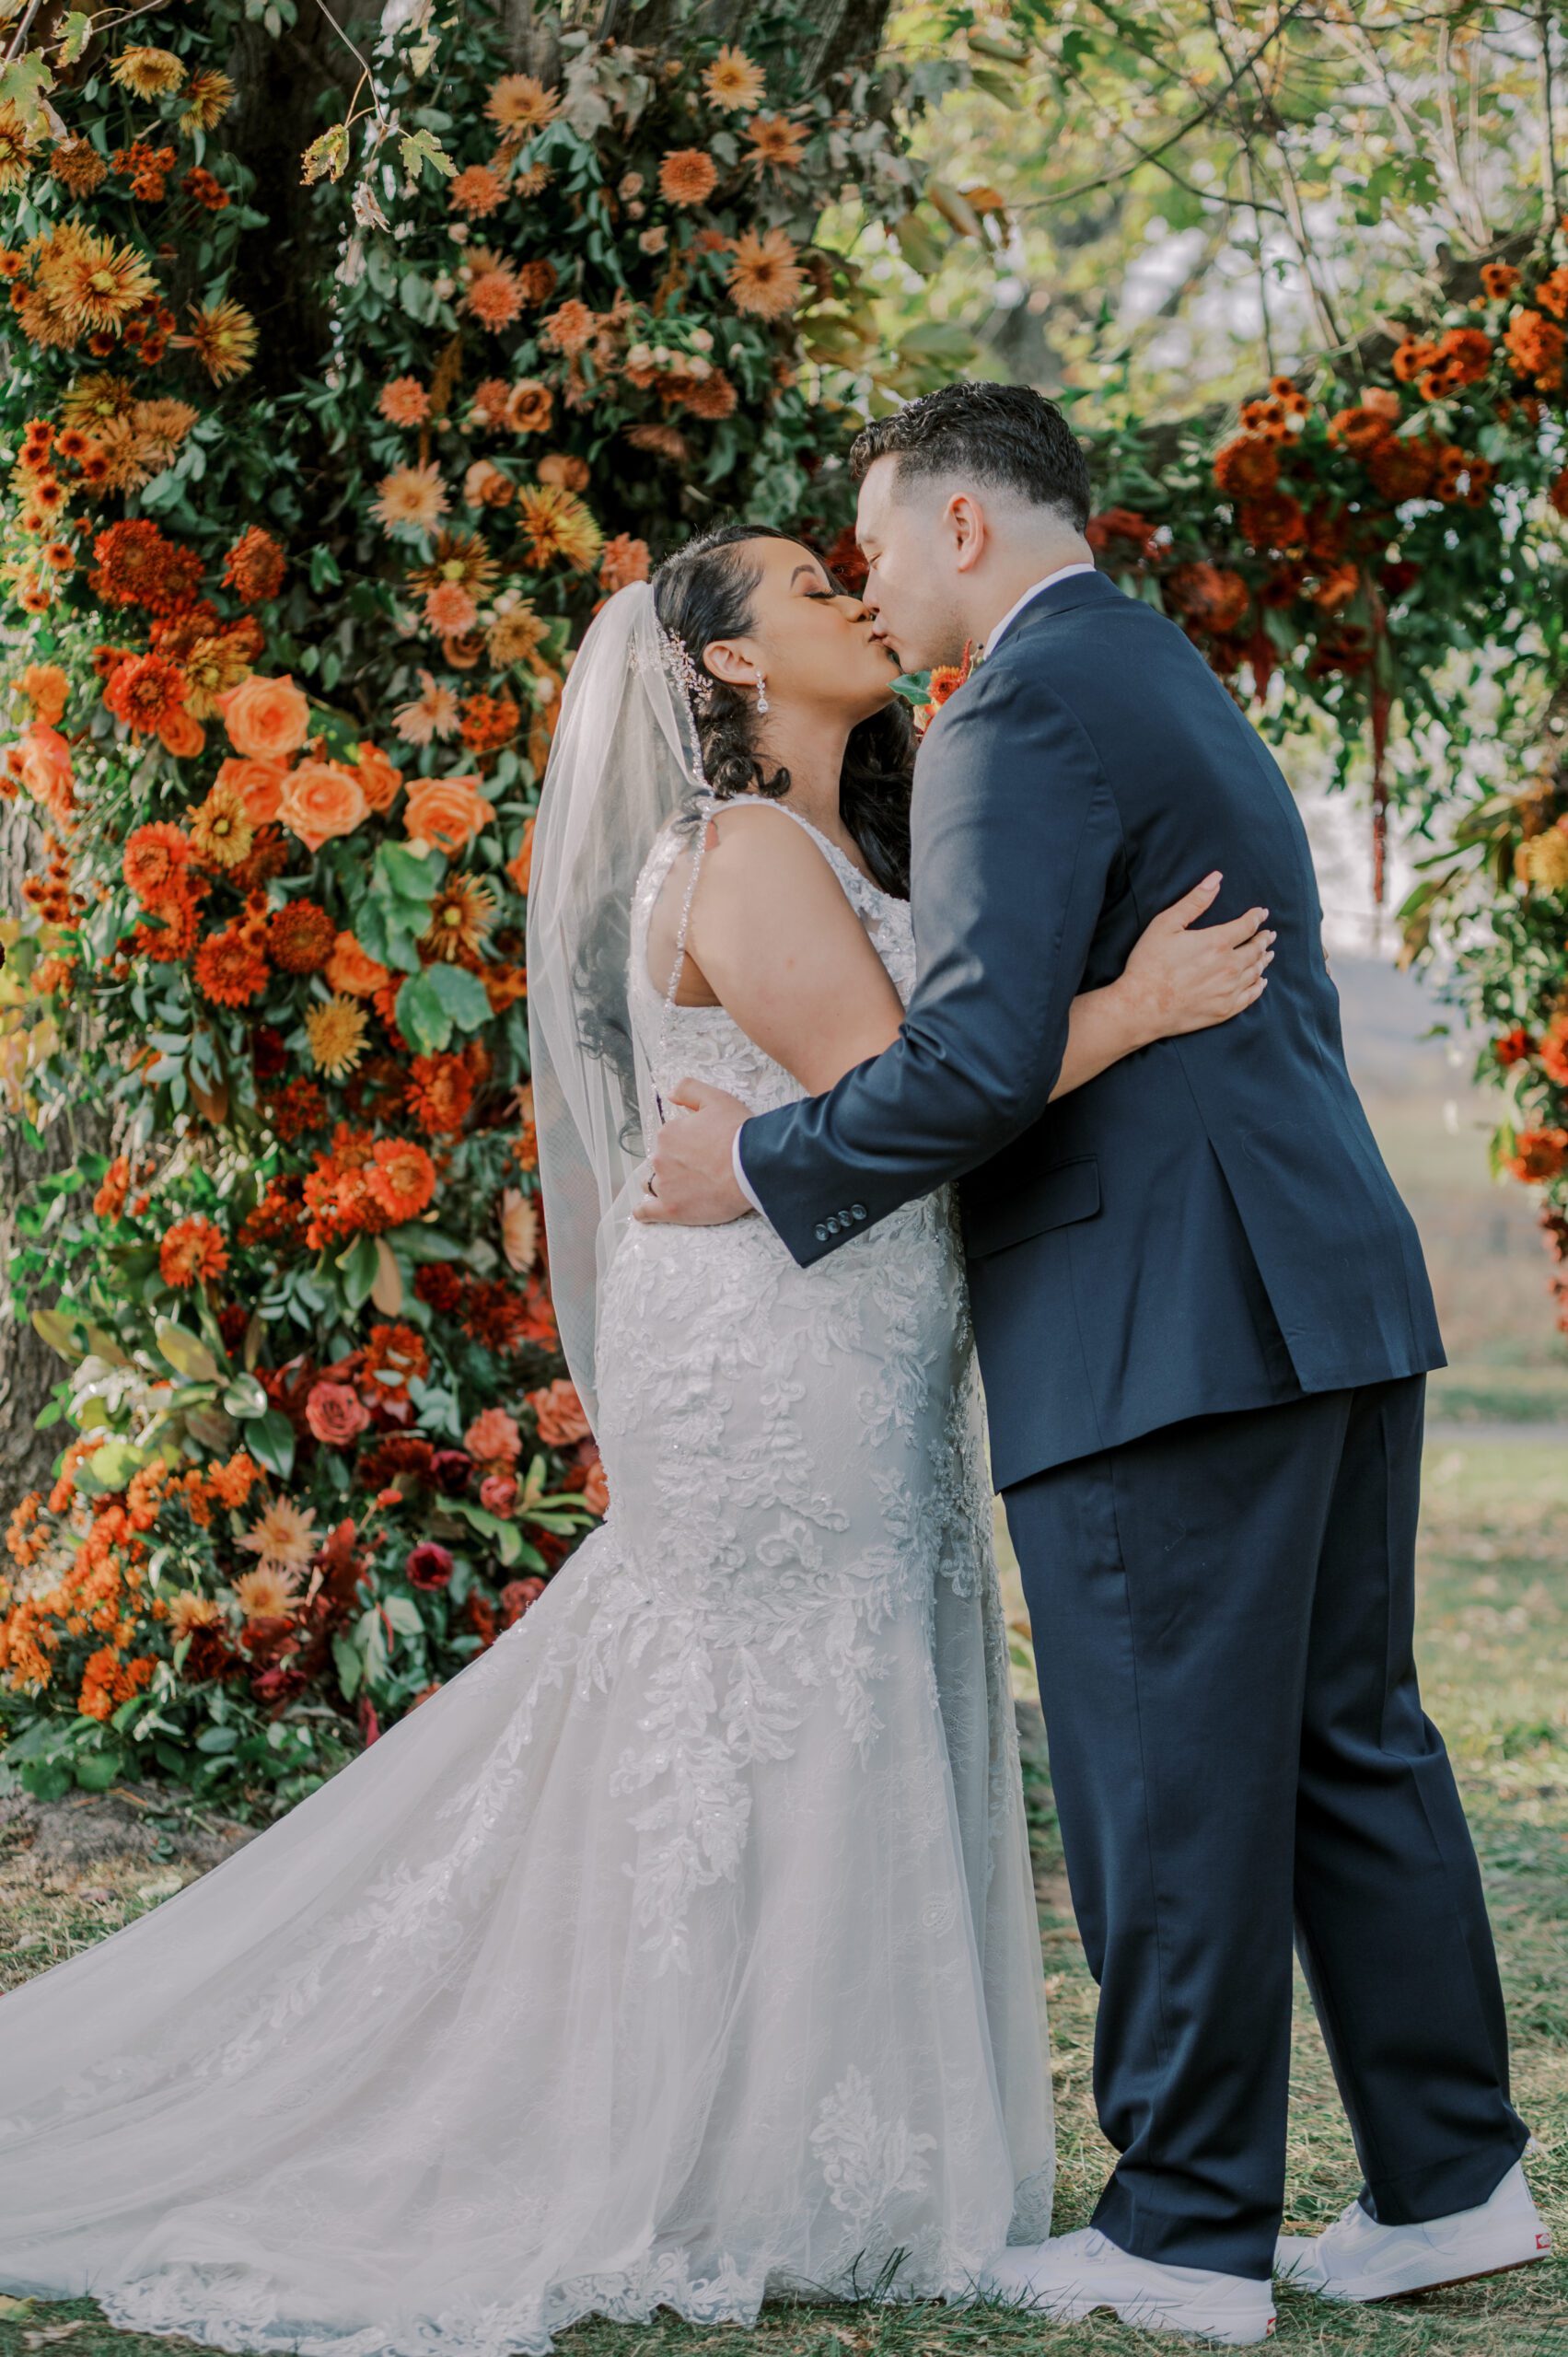 Bride and groom share their first kiss as husband and wife, orange and burgundy flowers behind them